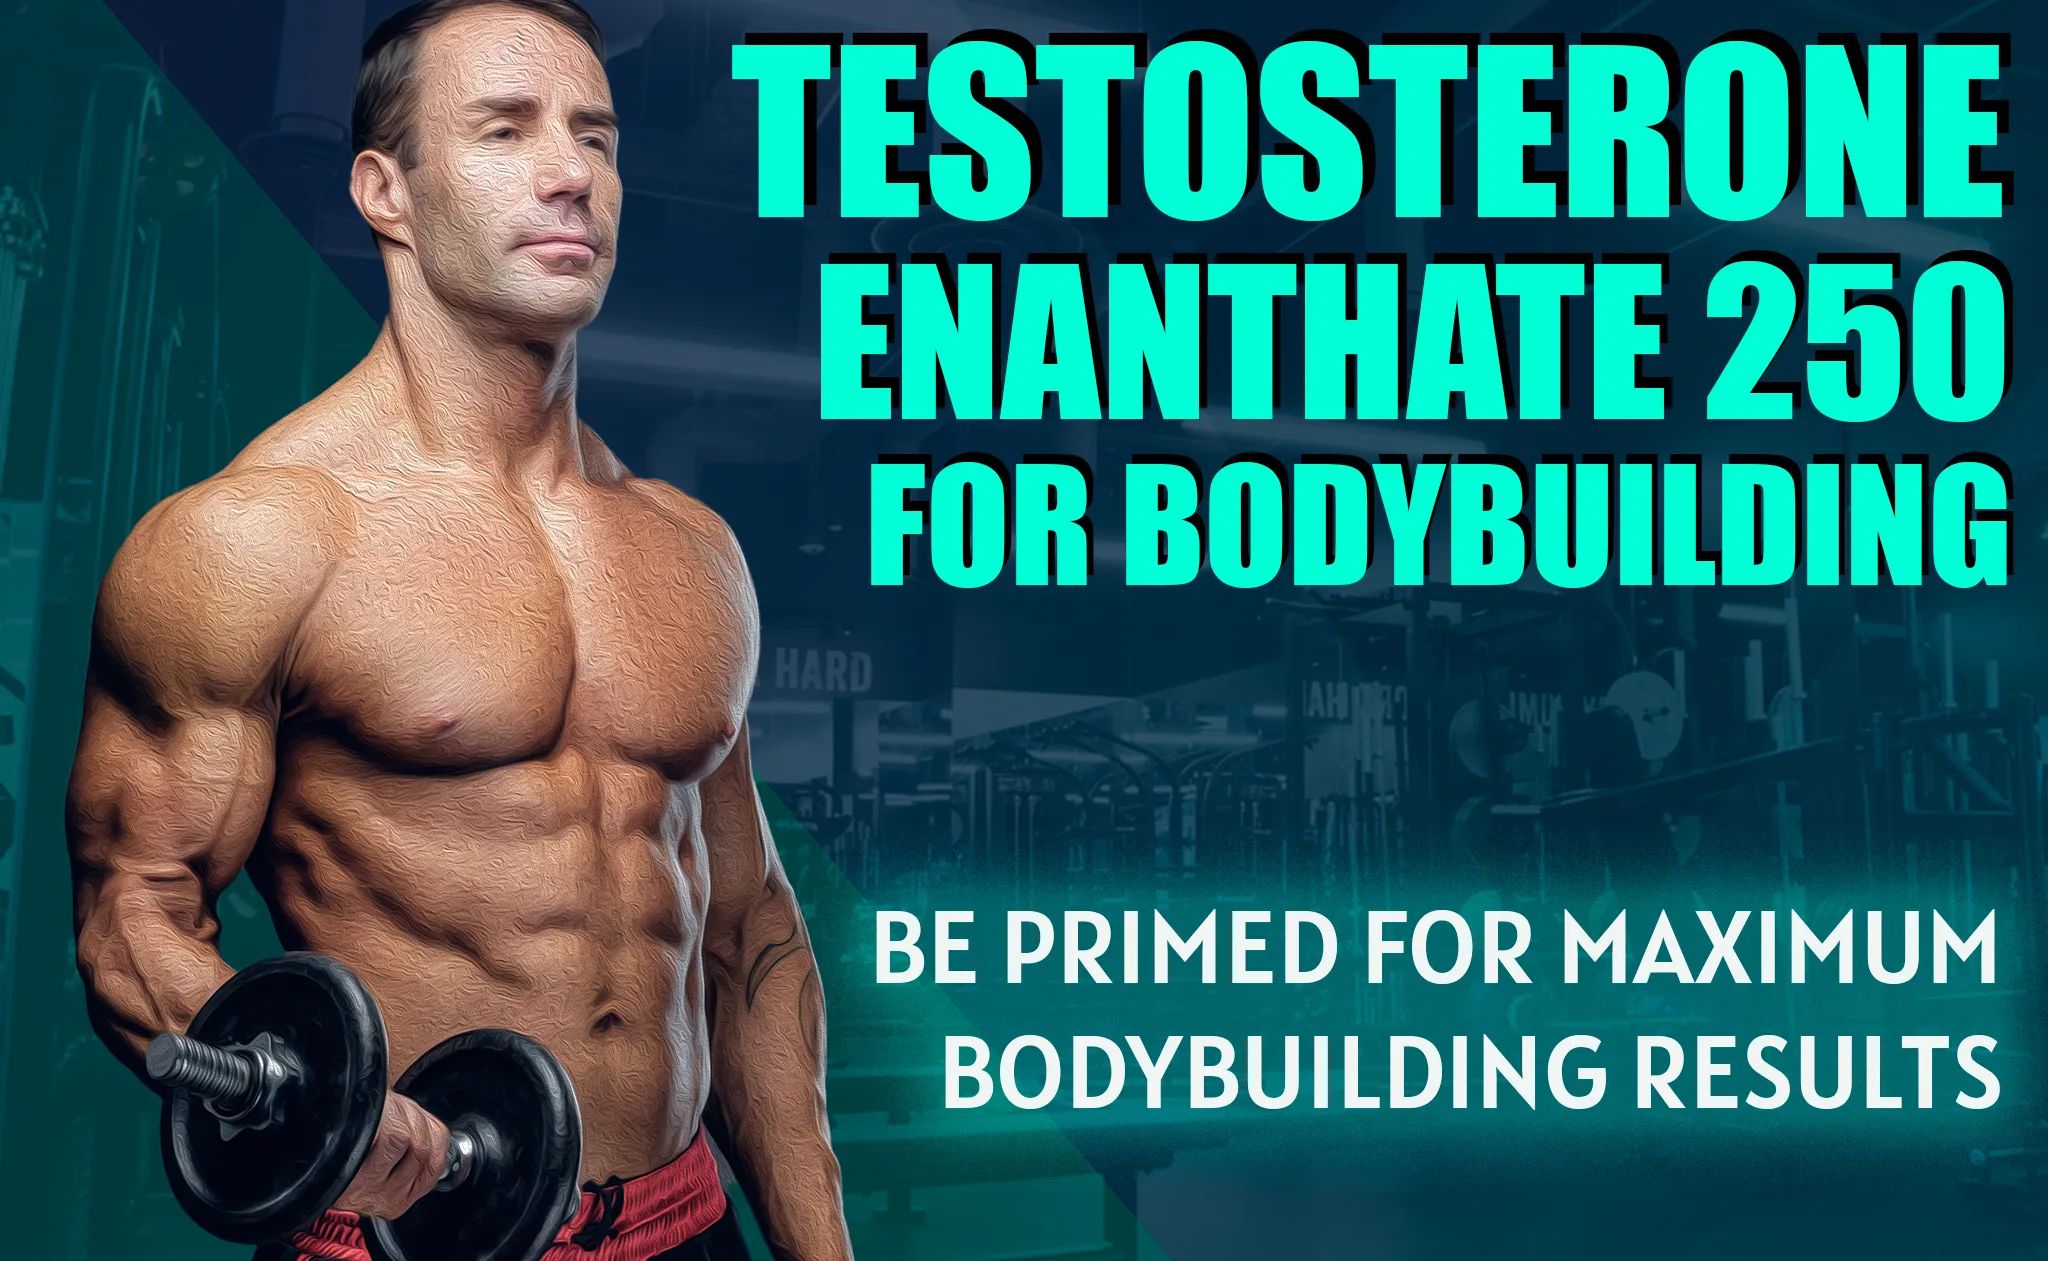 Testosterone Enanthate 250 for Bodybuilding – Be Primed for Maximum Bodybuilding Results